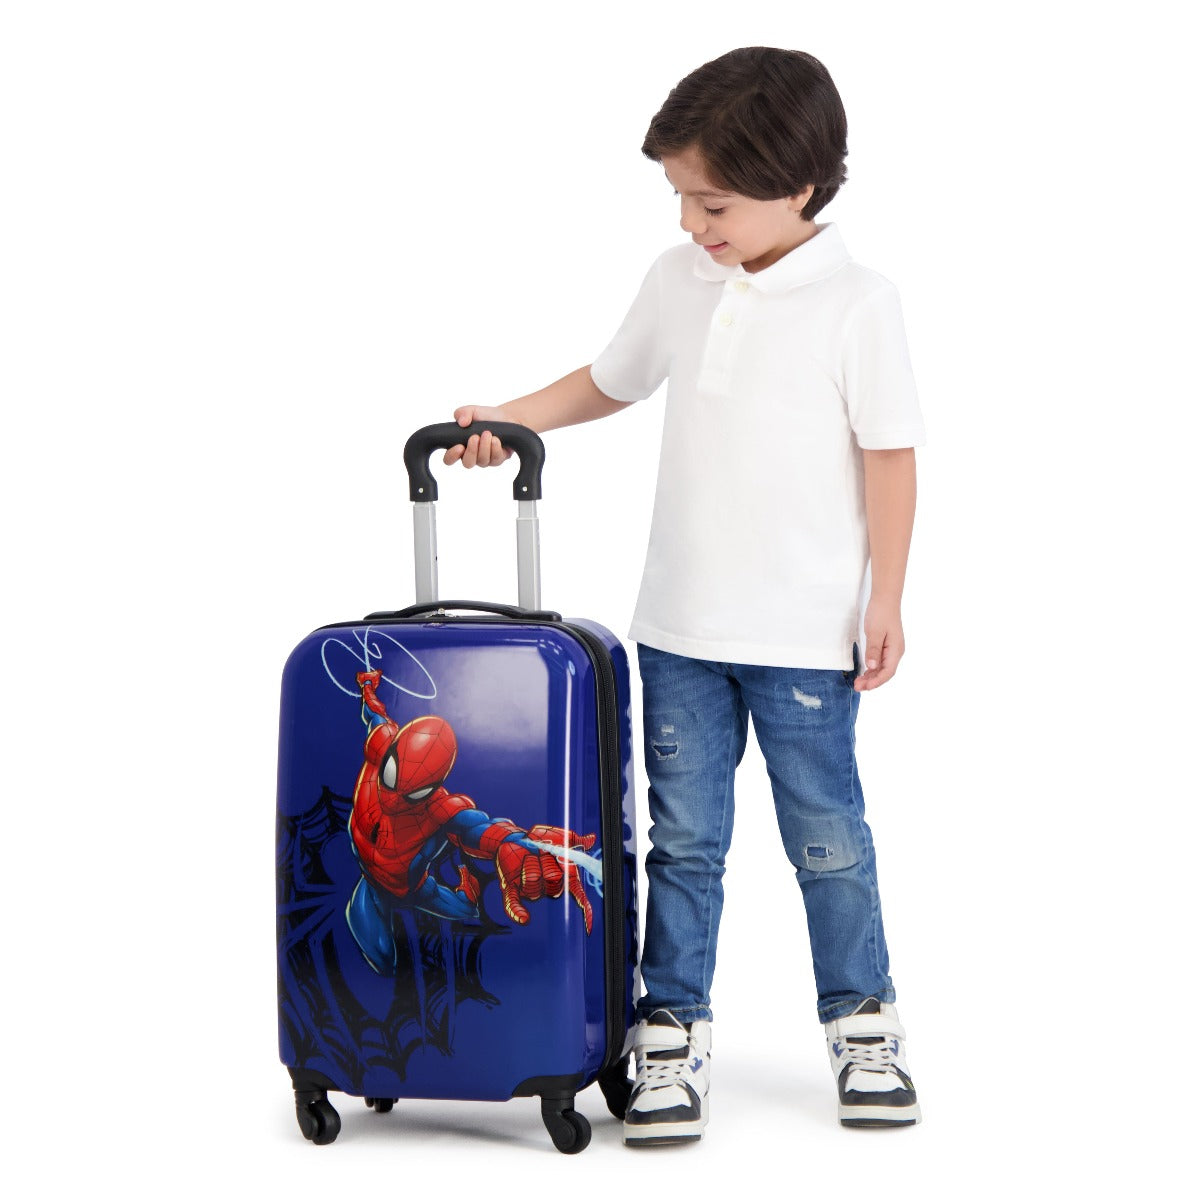 Kids Blue Ful Marvel Spiderman web 21" carry-on hard shell spinner suitcase rolling luggage for traveling